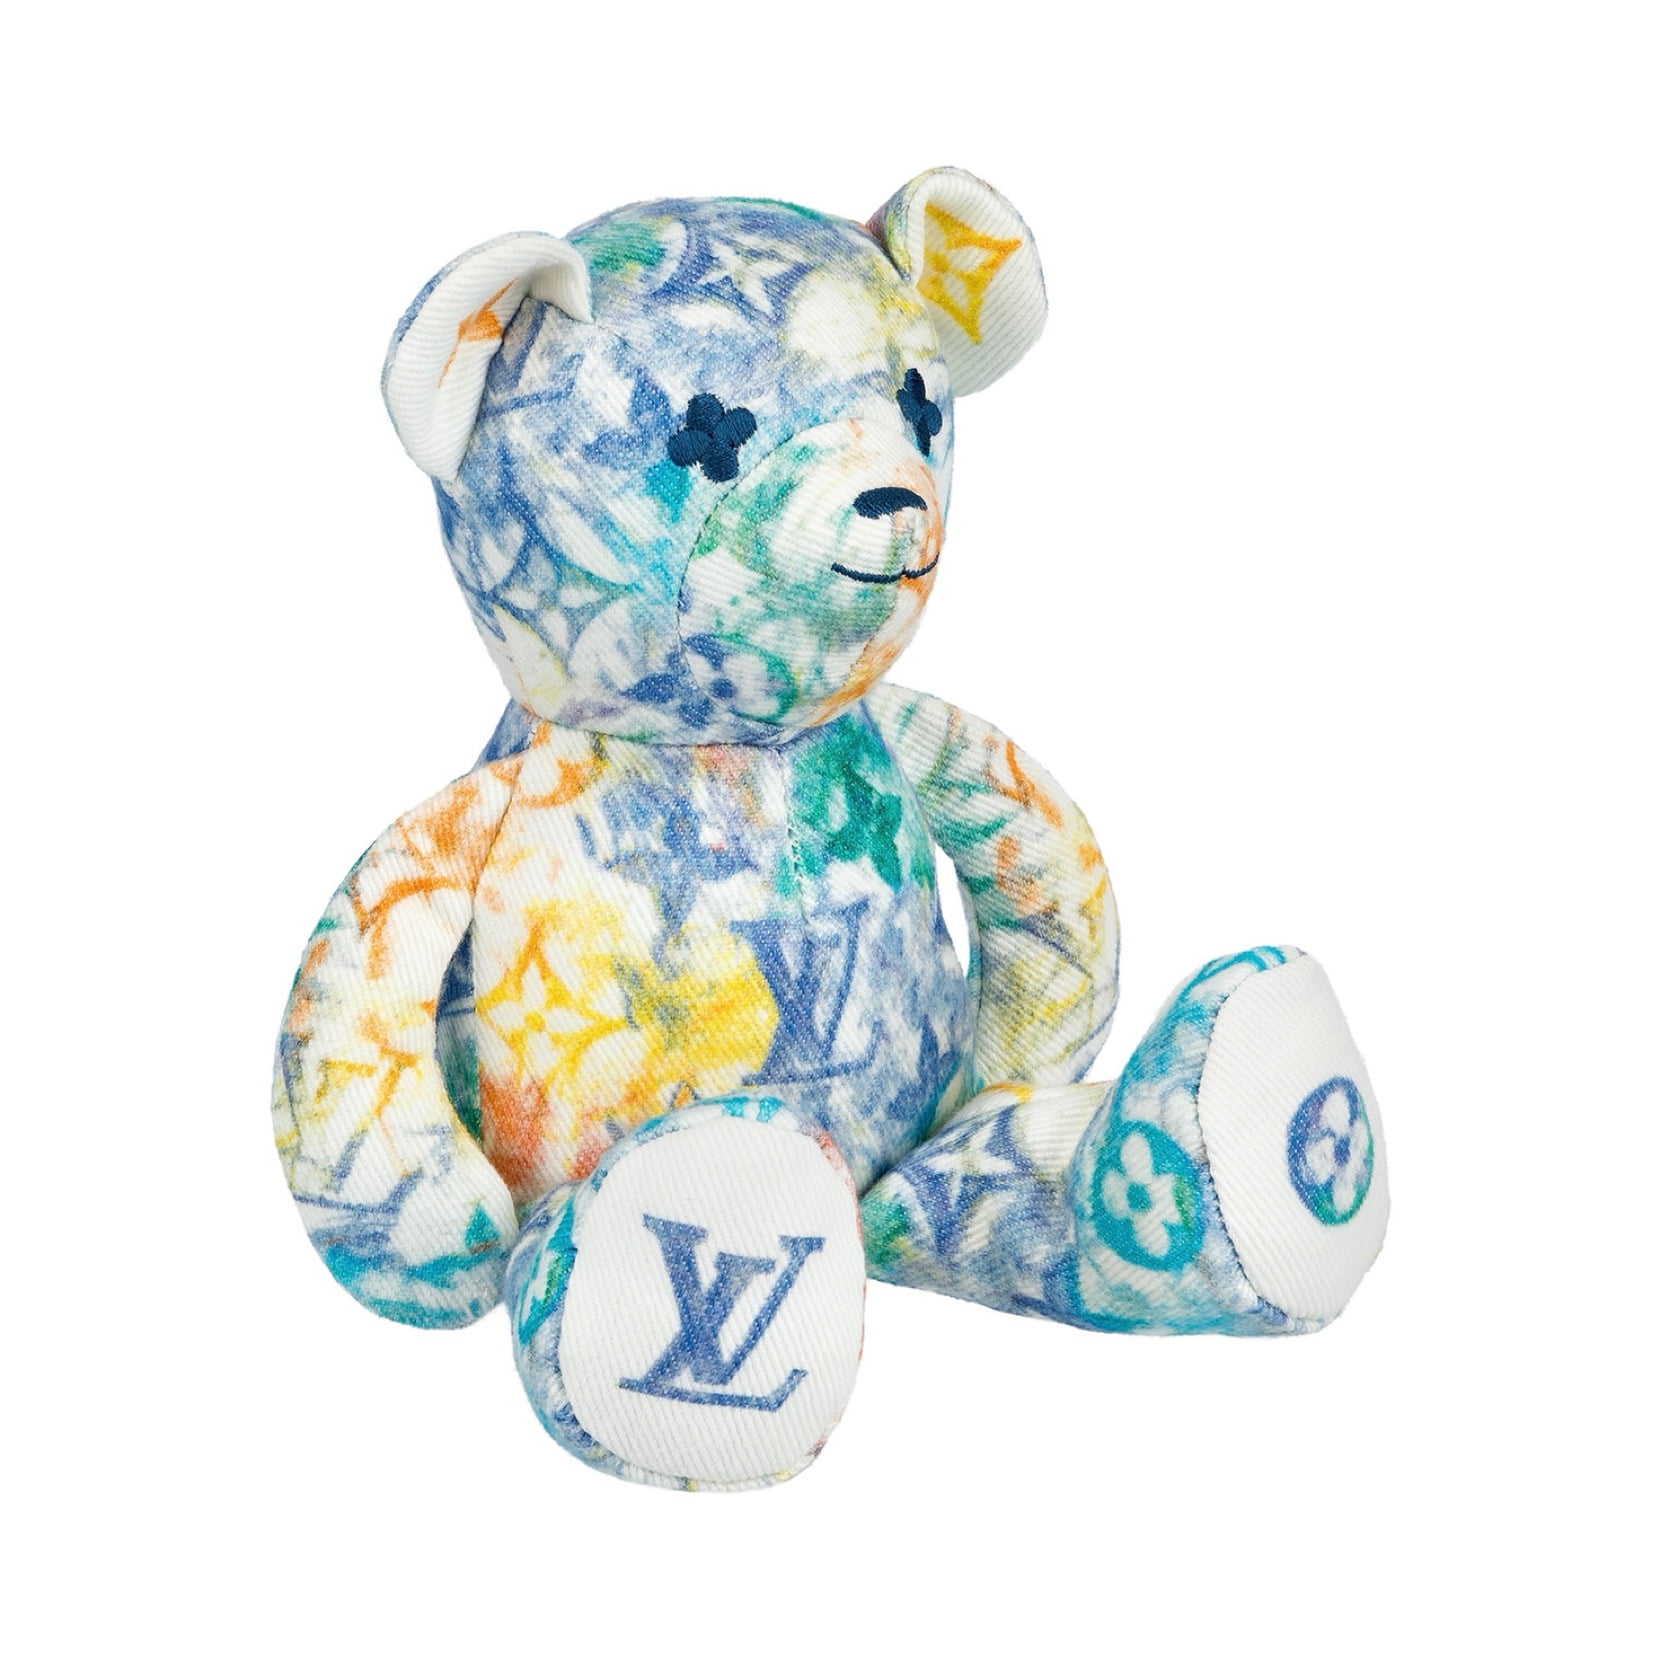 DouDou Teddy Bear by Louis Vuitton for use by 360 Magazine